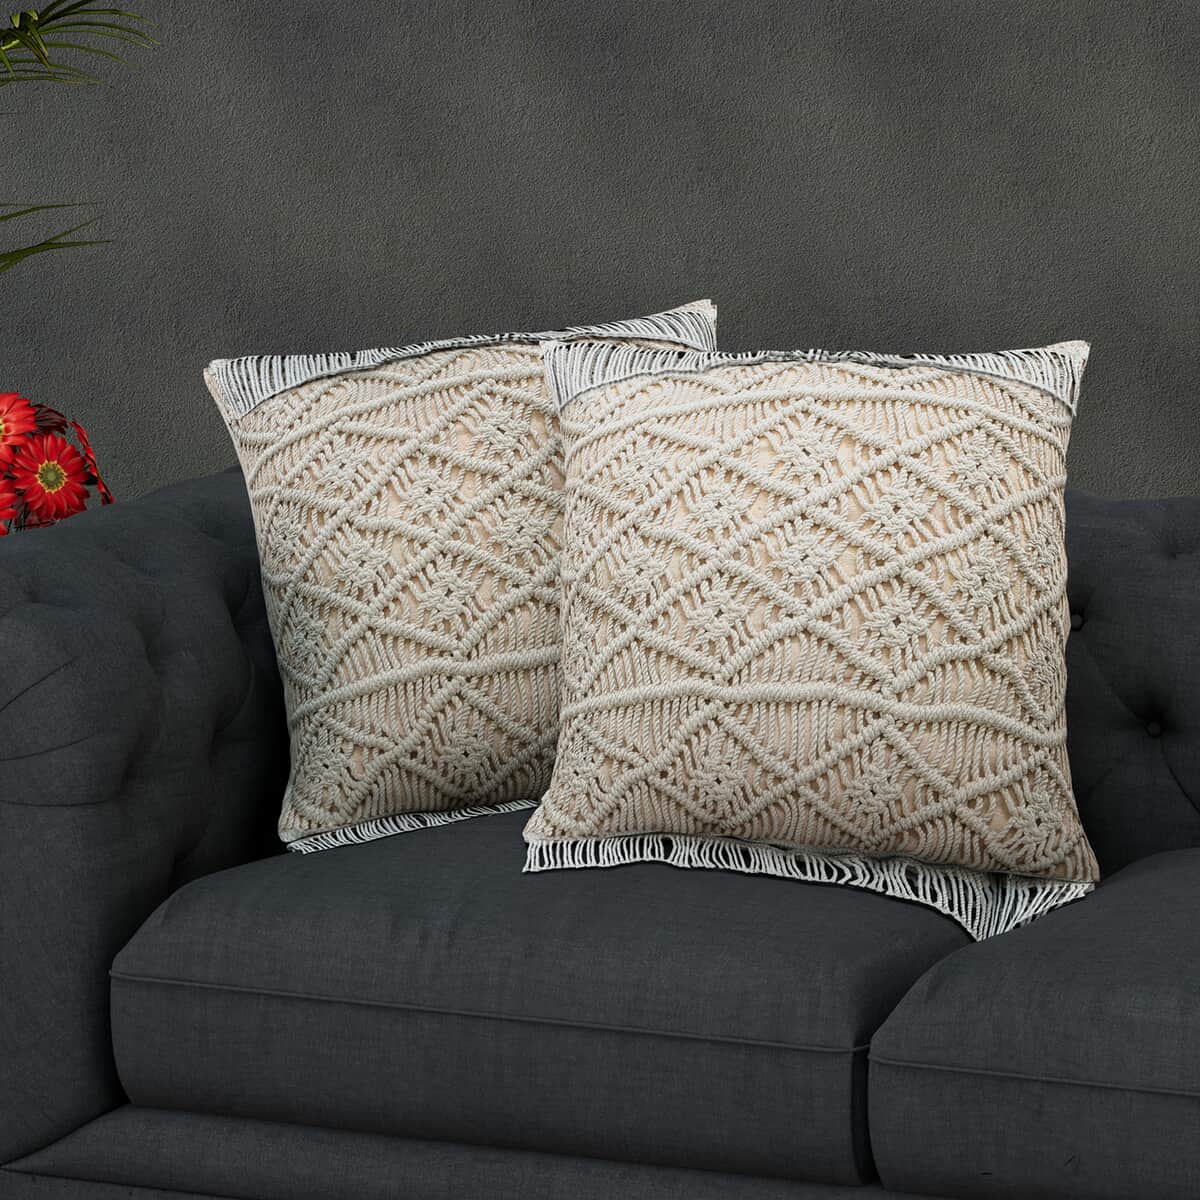 Buy Homesmart Cushion Cover Pillow Insert - 100% Microfiber at ShopLC.